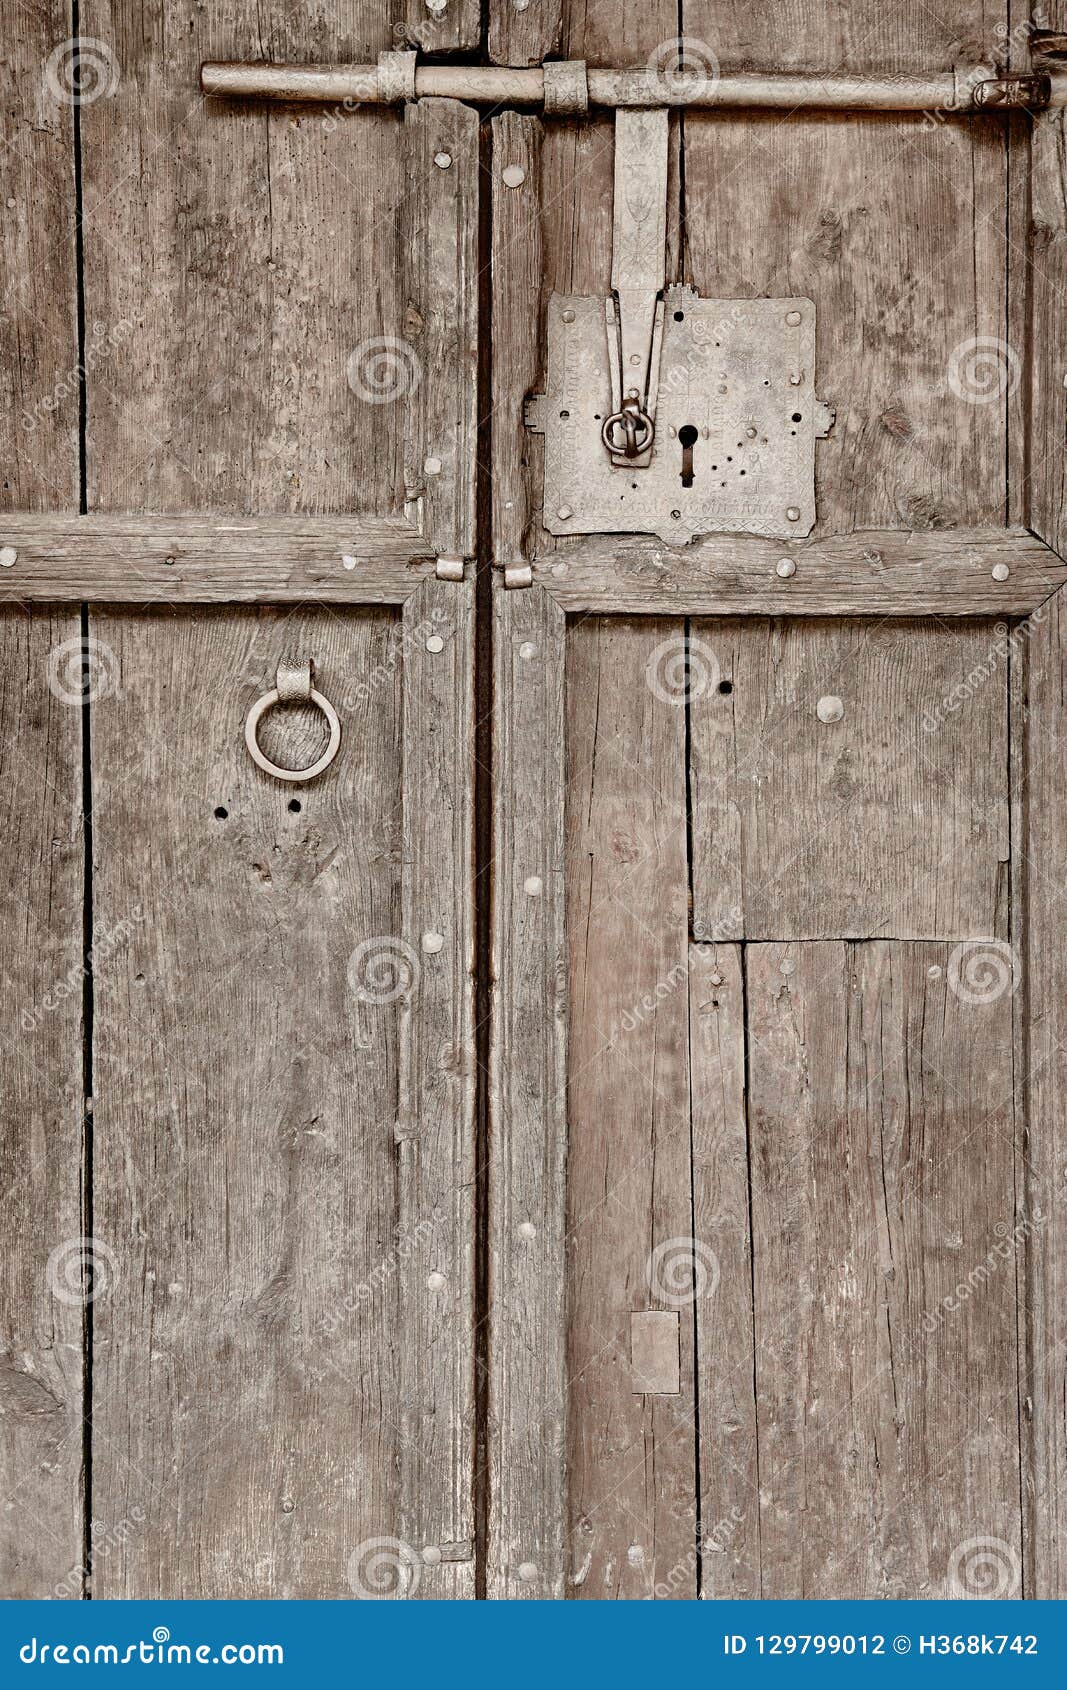 Antique Wooden Door With Old Classic Iron Lock Vintage Stock Photo Image Of Brown Design 129799012